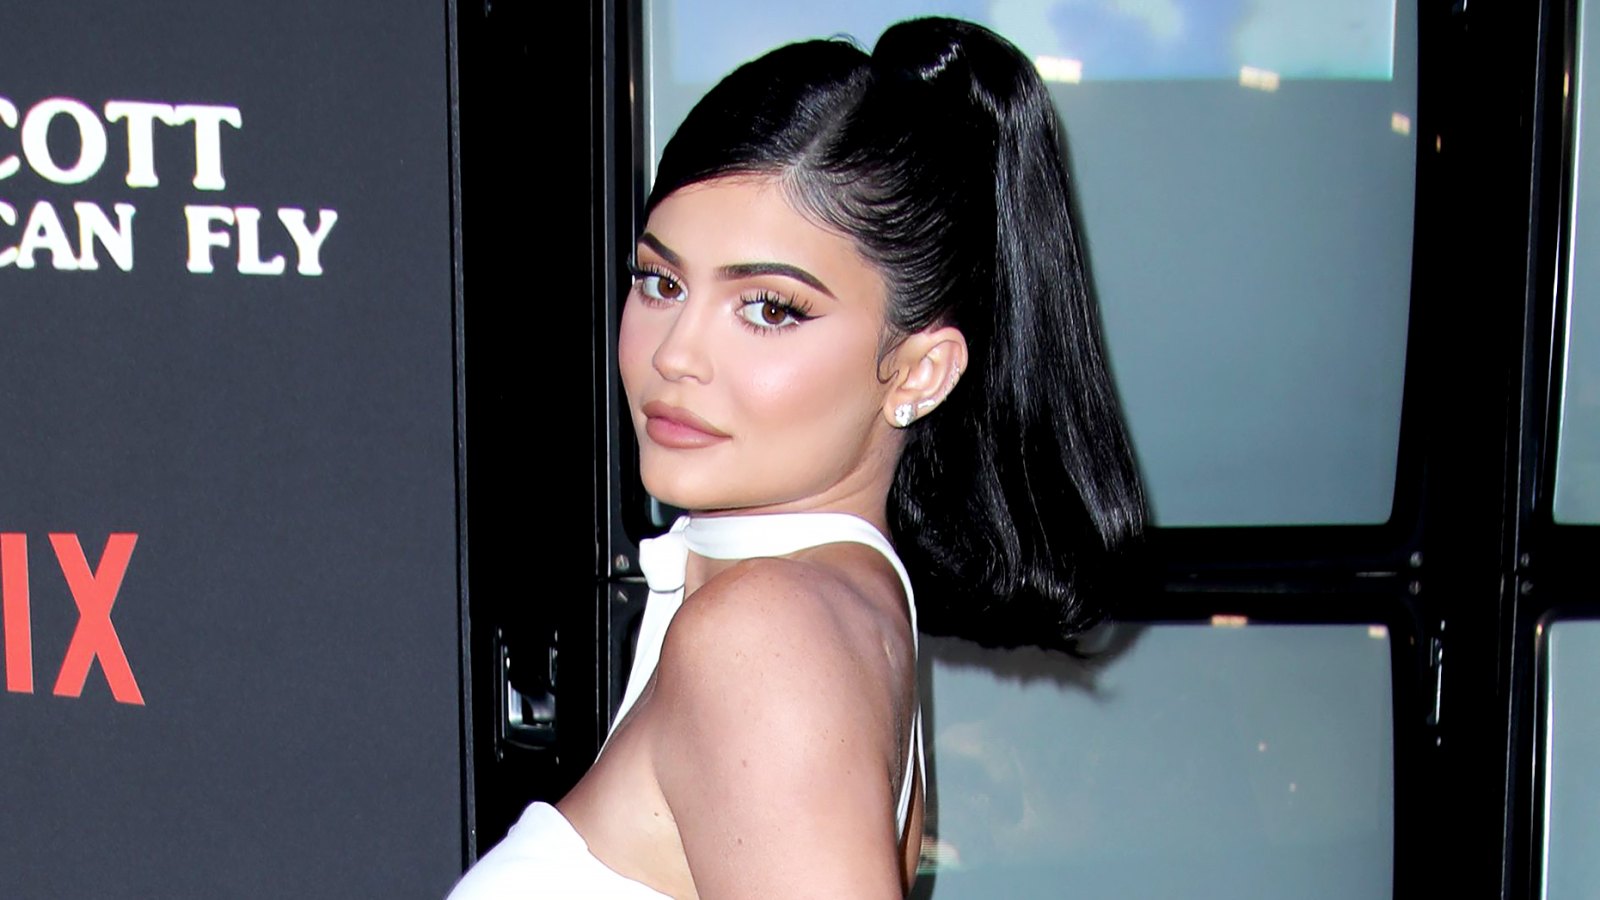 Kylie Jenner Claps Back at Troll Criticizing Her Post-Baby Body